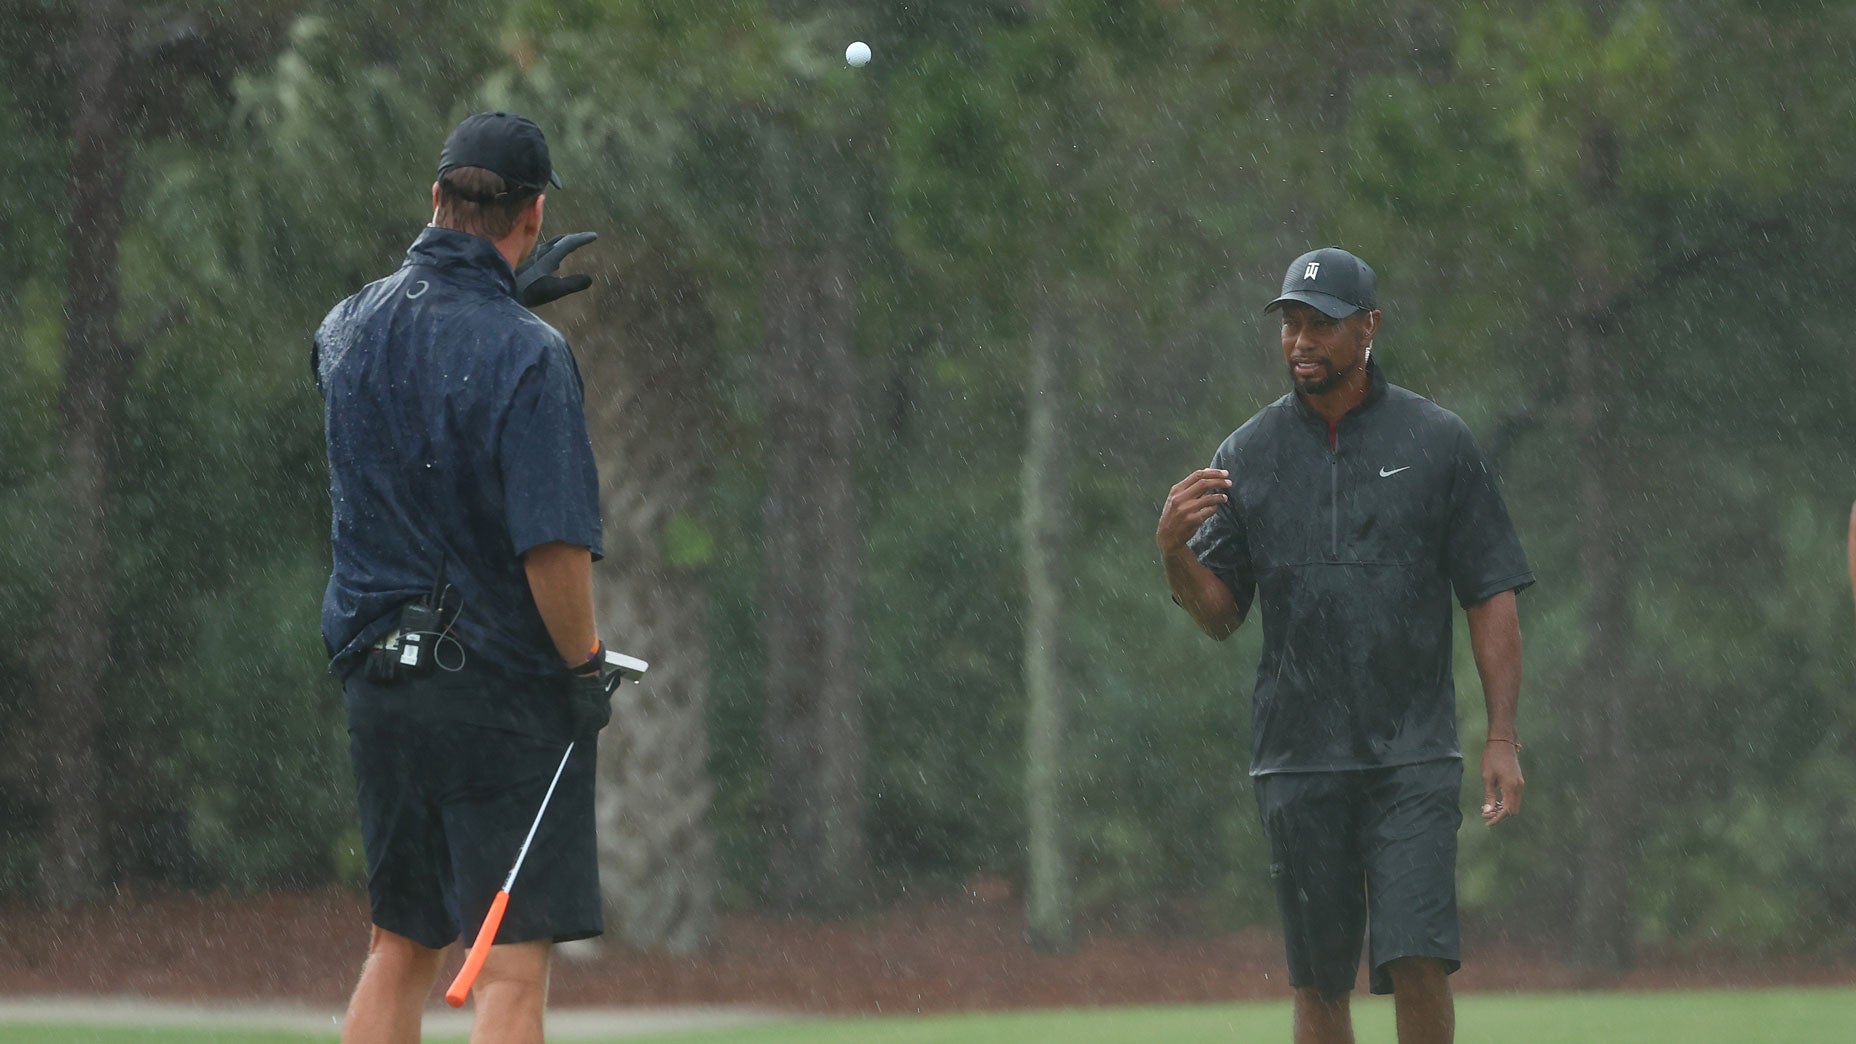 Tiger Woods tosses a ball to partner Peyton Manning as Tom Brady looks on at Medalist Golf Club.